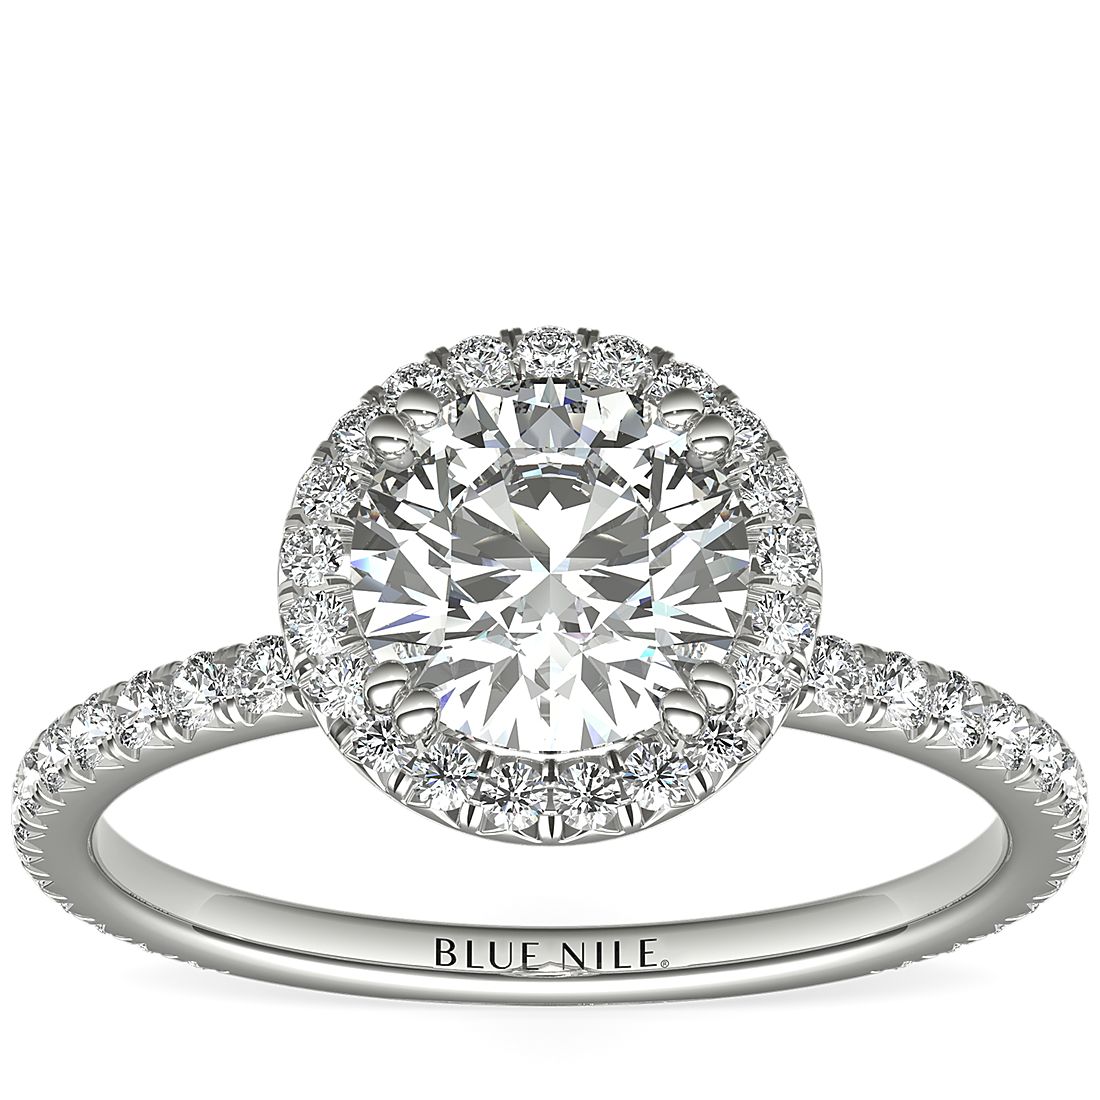 An engagement ring with a 1-carat round centre diamond surrounded by french pavé set diamonds.